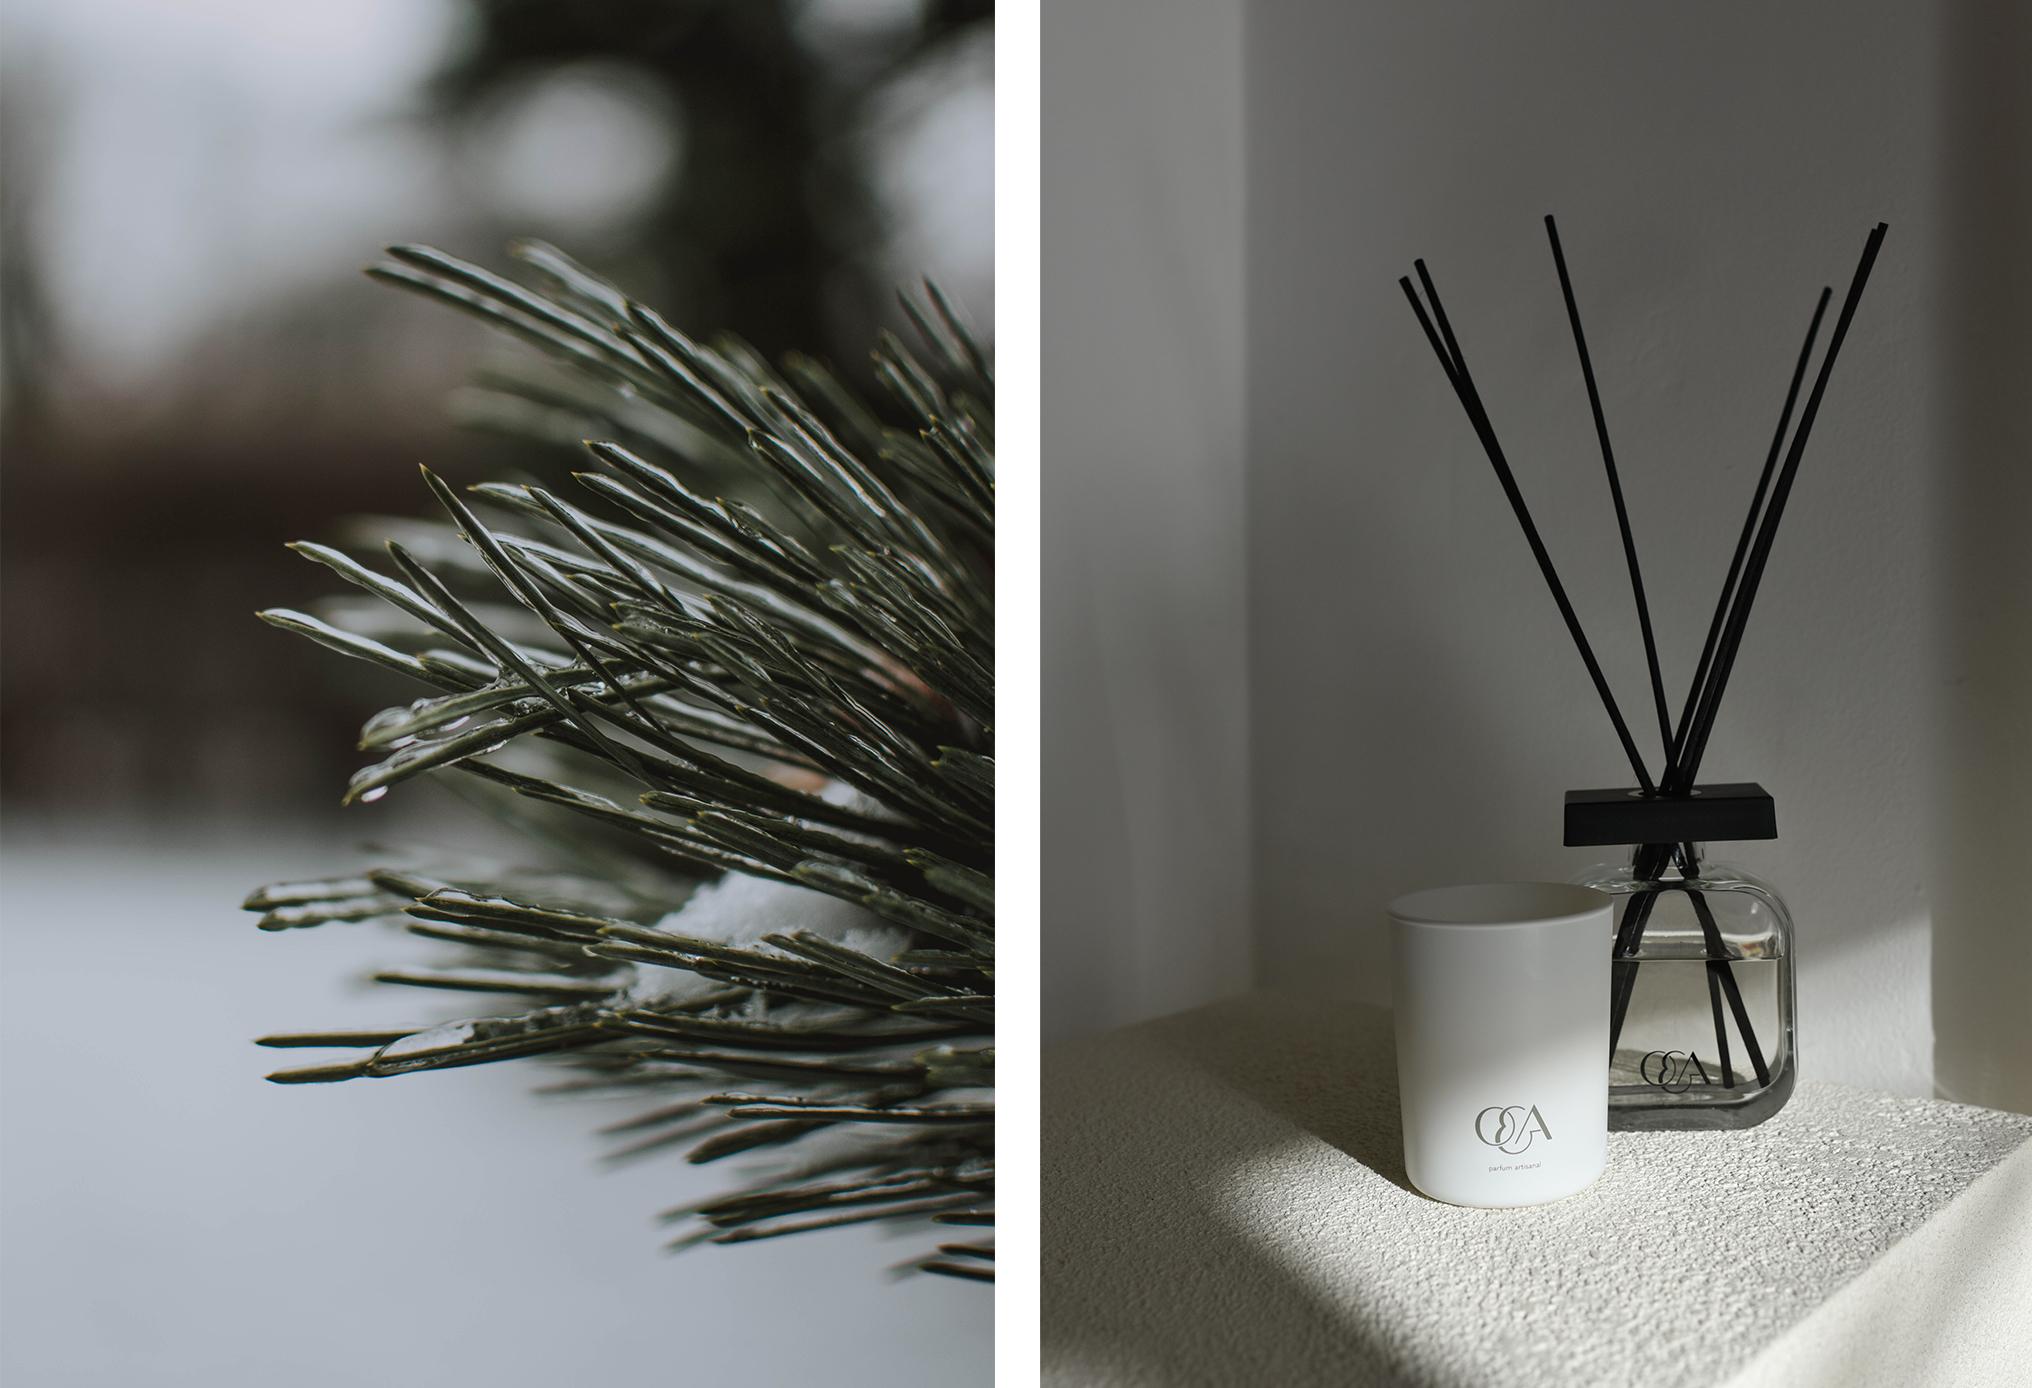 O&A London creates sophisticated scents for your home together with the best perfume houses in Grasse. Individually designed home diffusers will add an indelible impression of your home, literally in the air itself.

Top notes: green notes of fir